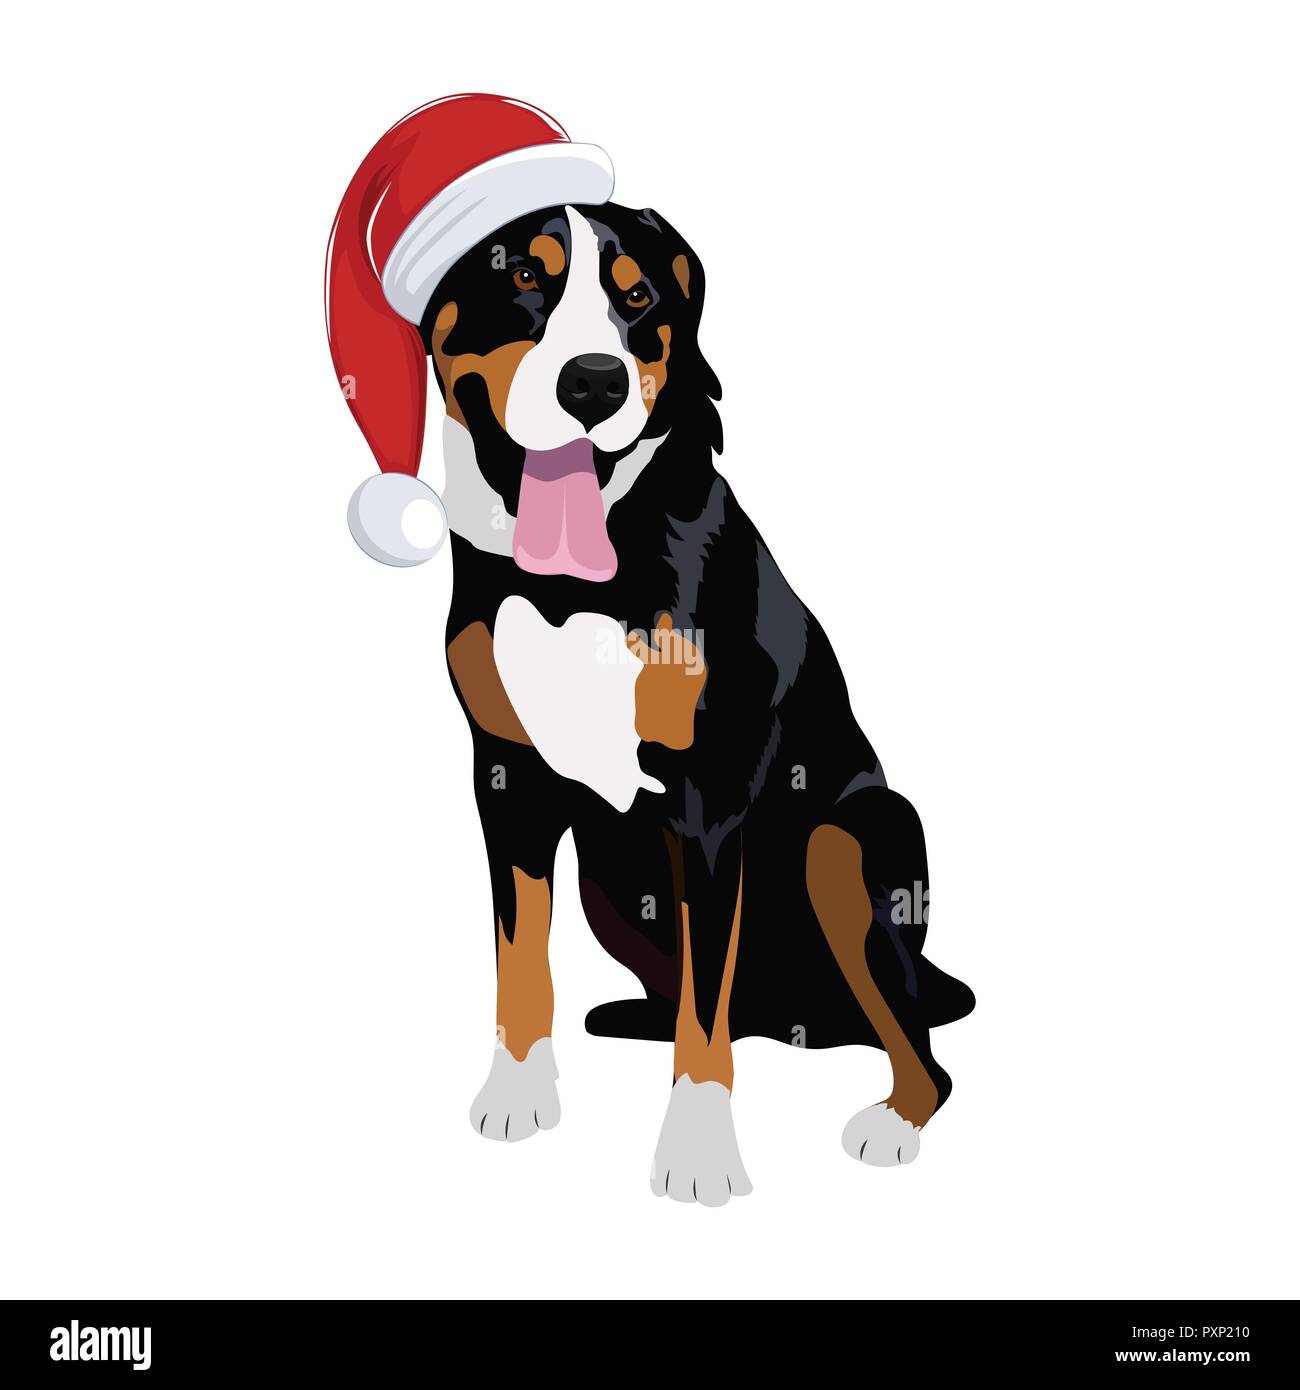 Swiss Mountain dog with Christmas hat isolated on white background. Purebred dog panting and wearing Santa hat. Stock Vector